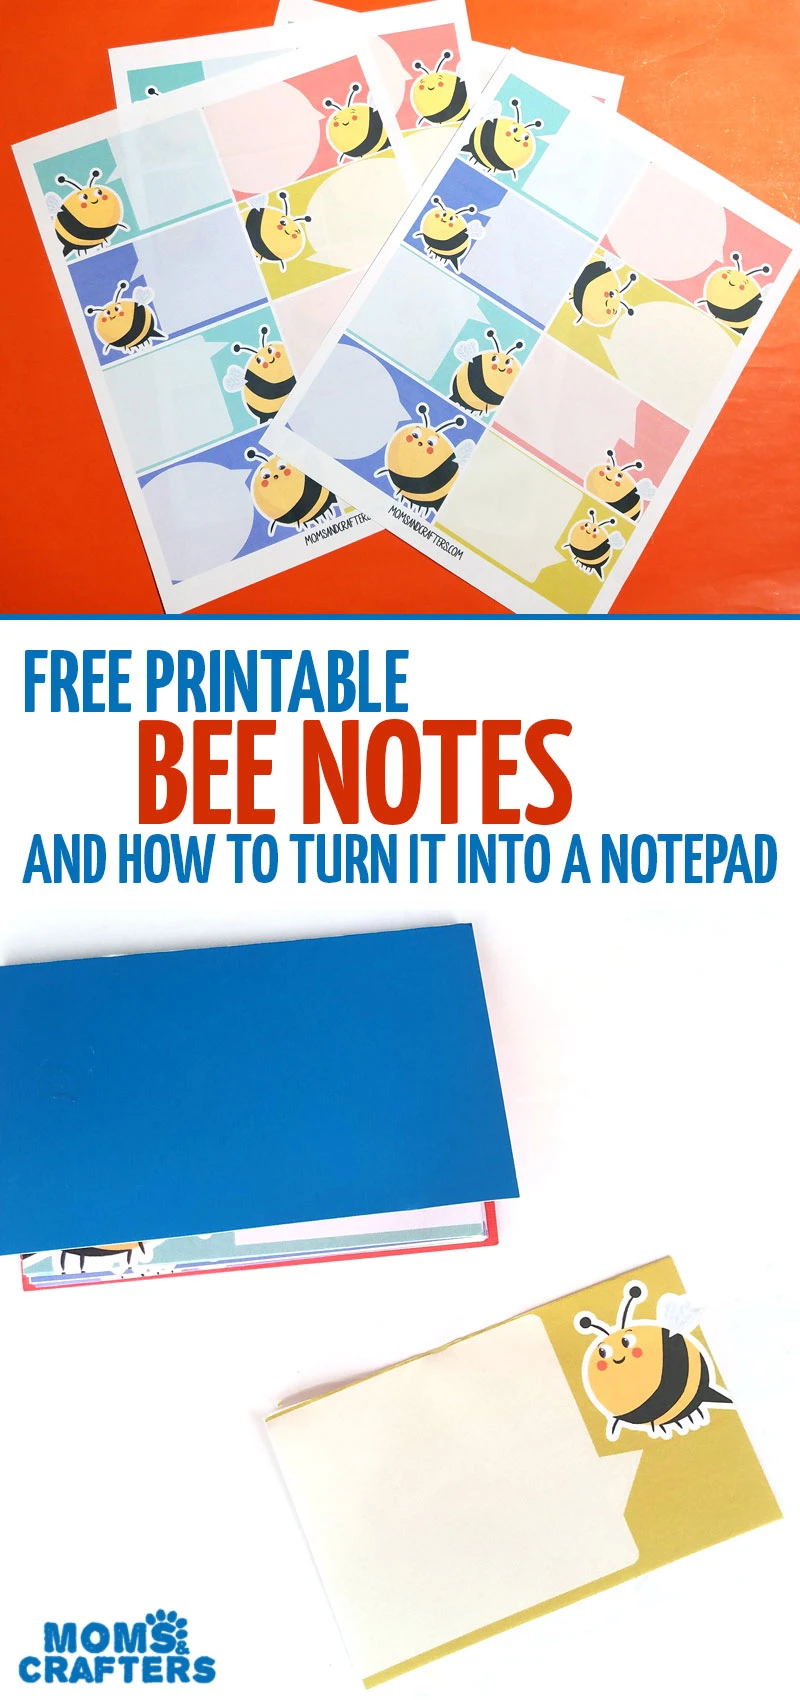 Click to download your free printable lunch box notes with adorable friendly bees on them! Learn how to turn them into a DIY notepad so you have them conveniently at your fingertips. 